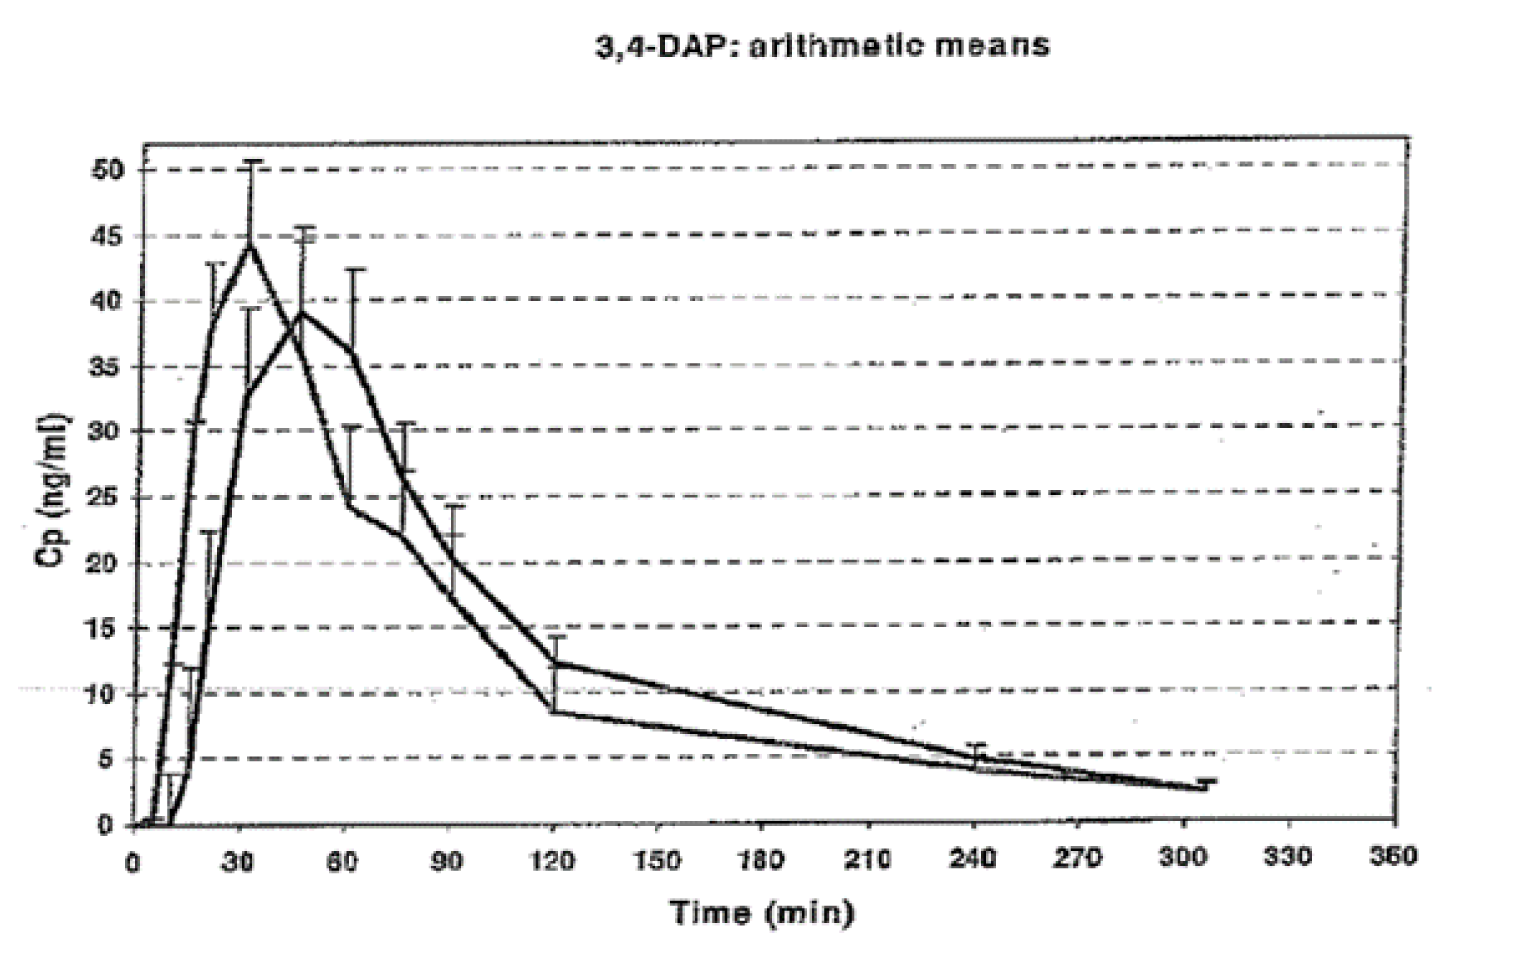 The figure shows 2 curves representing plasma concentrations of amifampridine after administration of salt in tablets and compared to base in capsules. The salt tablet formulation resulted in a plasma concentration curve with a higher peak concentration (roughly 45 ng/ml) at an earlier time point (roughly 35 minutes) compared to the peak concentration of the base capsule formulation of roughly 40 ng/ml at roughly 55 minutes.